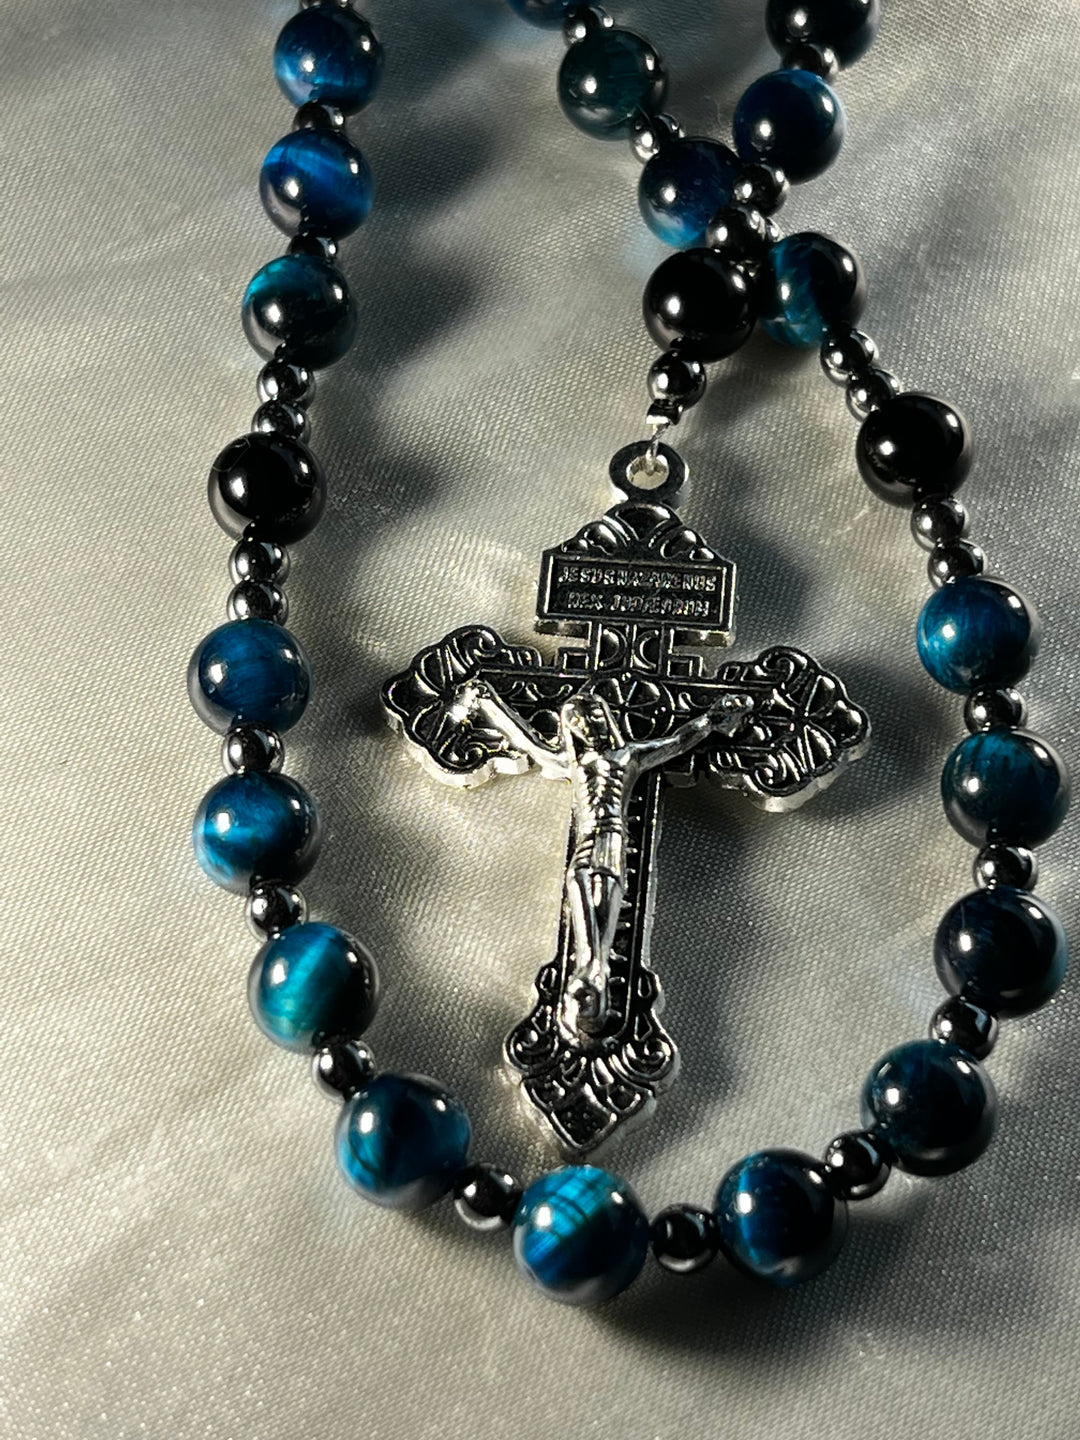 Aquamarine Tiger's Eye Groom's Rosary with Silver St. Michael Crucifix